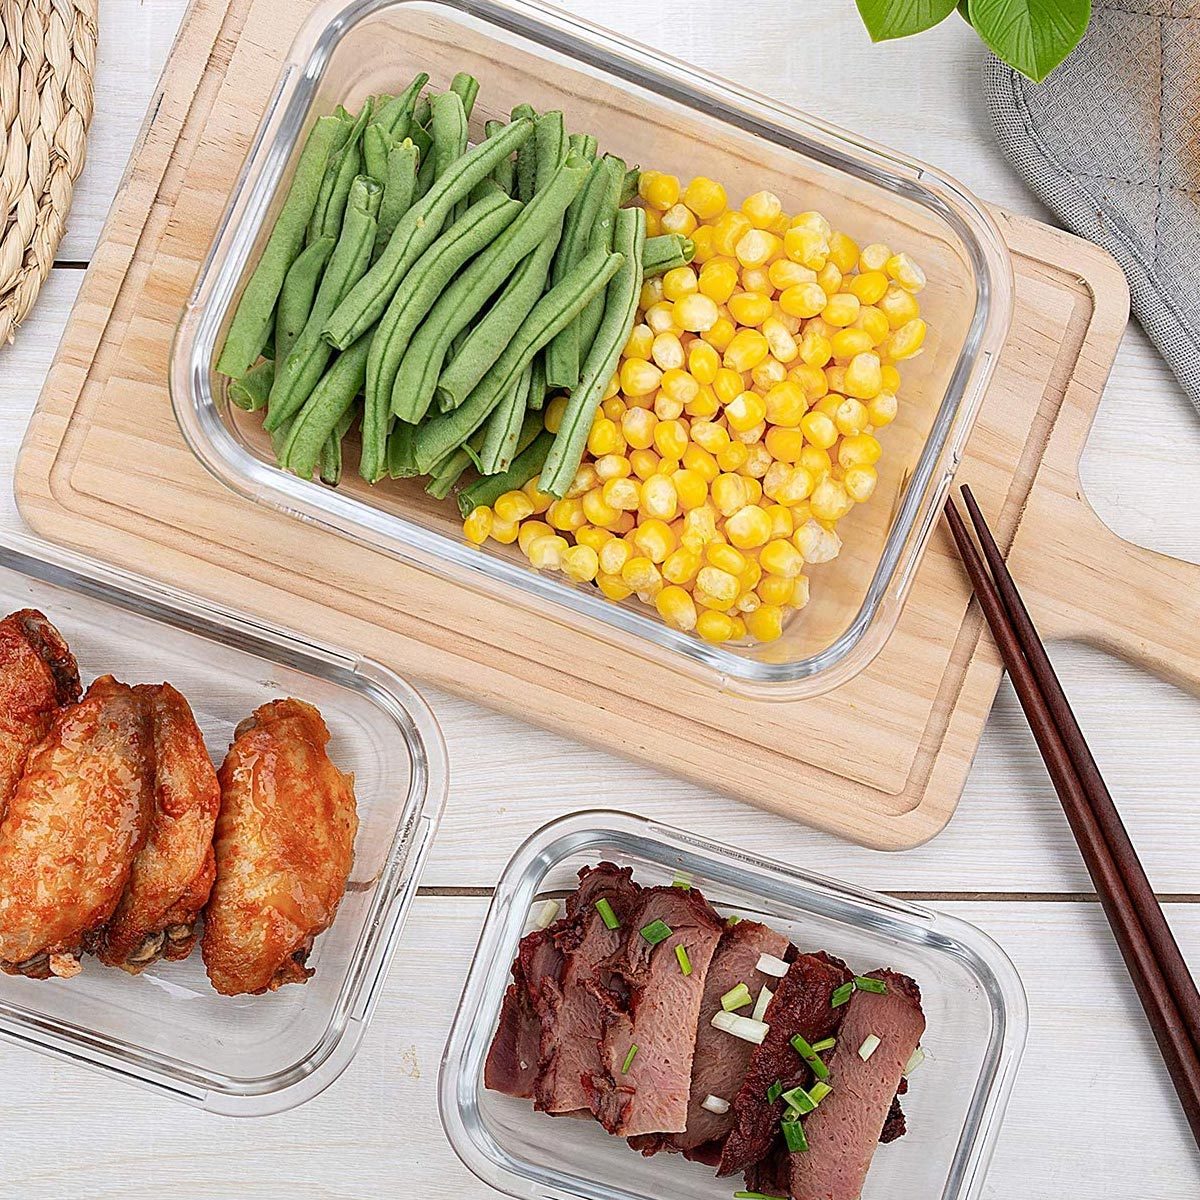 The 14 Best Meal Prep Containers of 2023